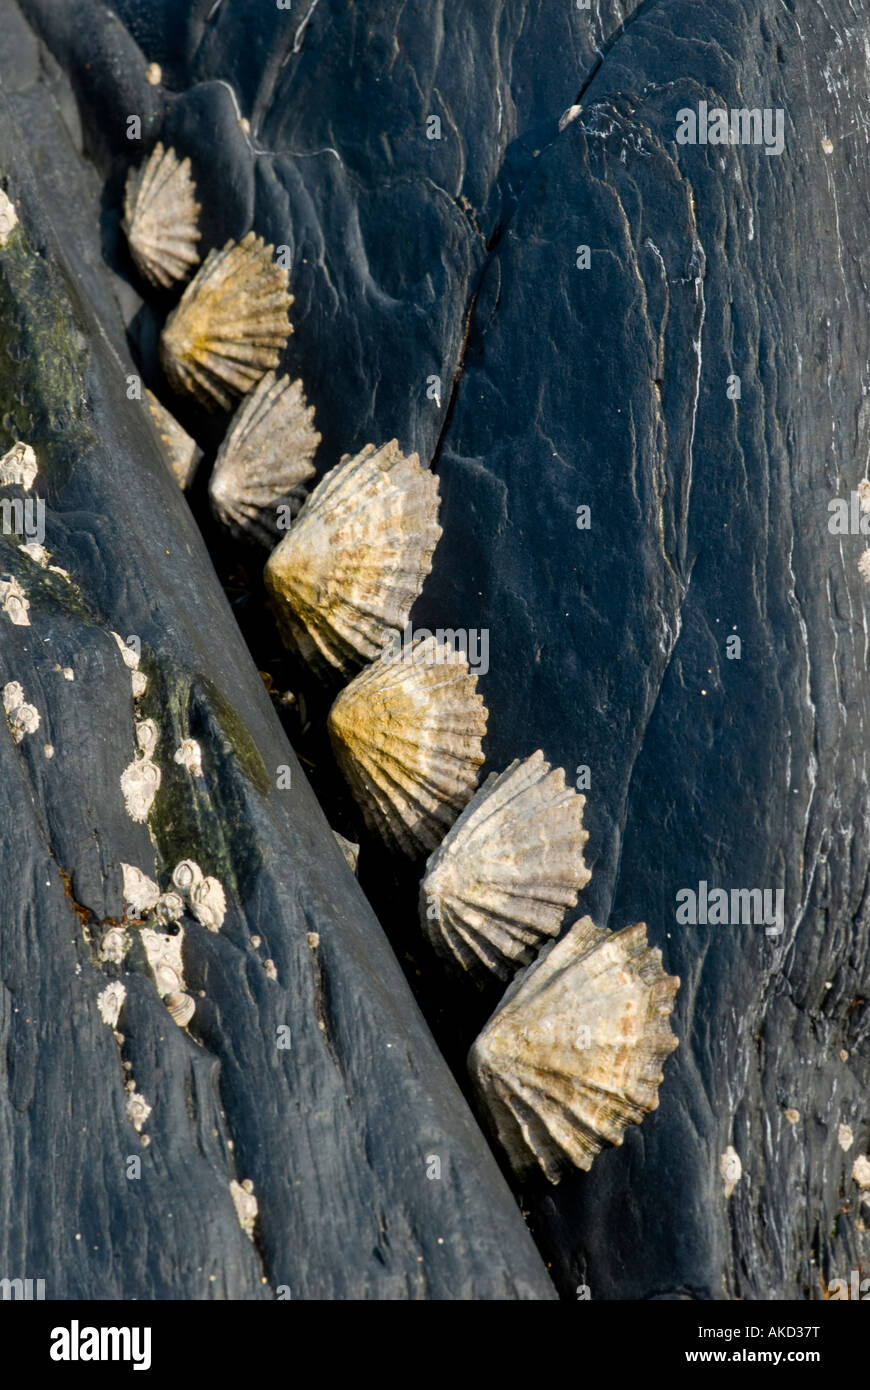 Common limpets on rocks Stock Photo